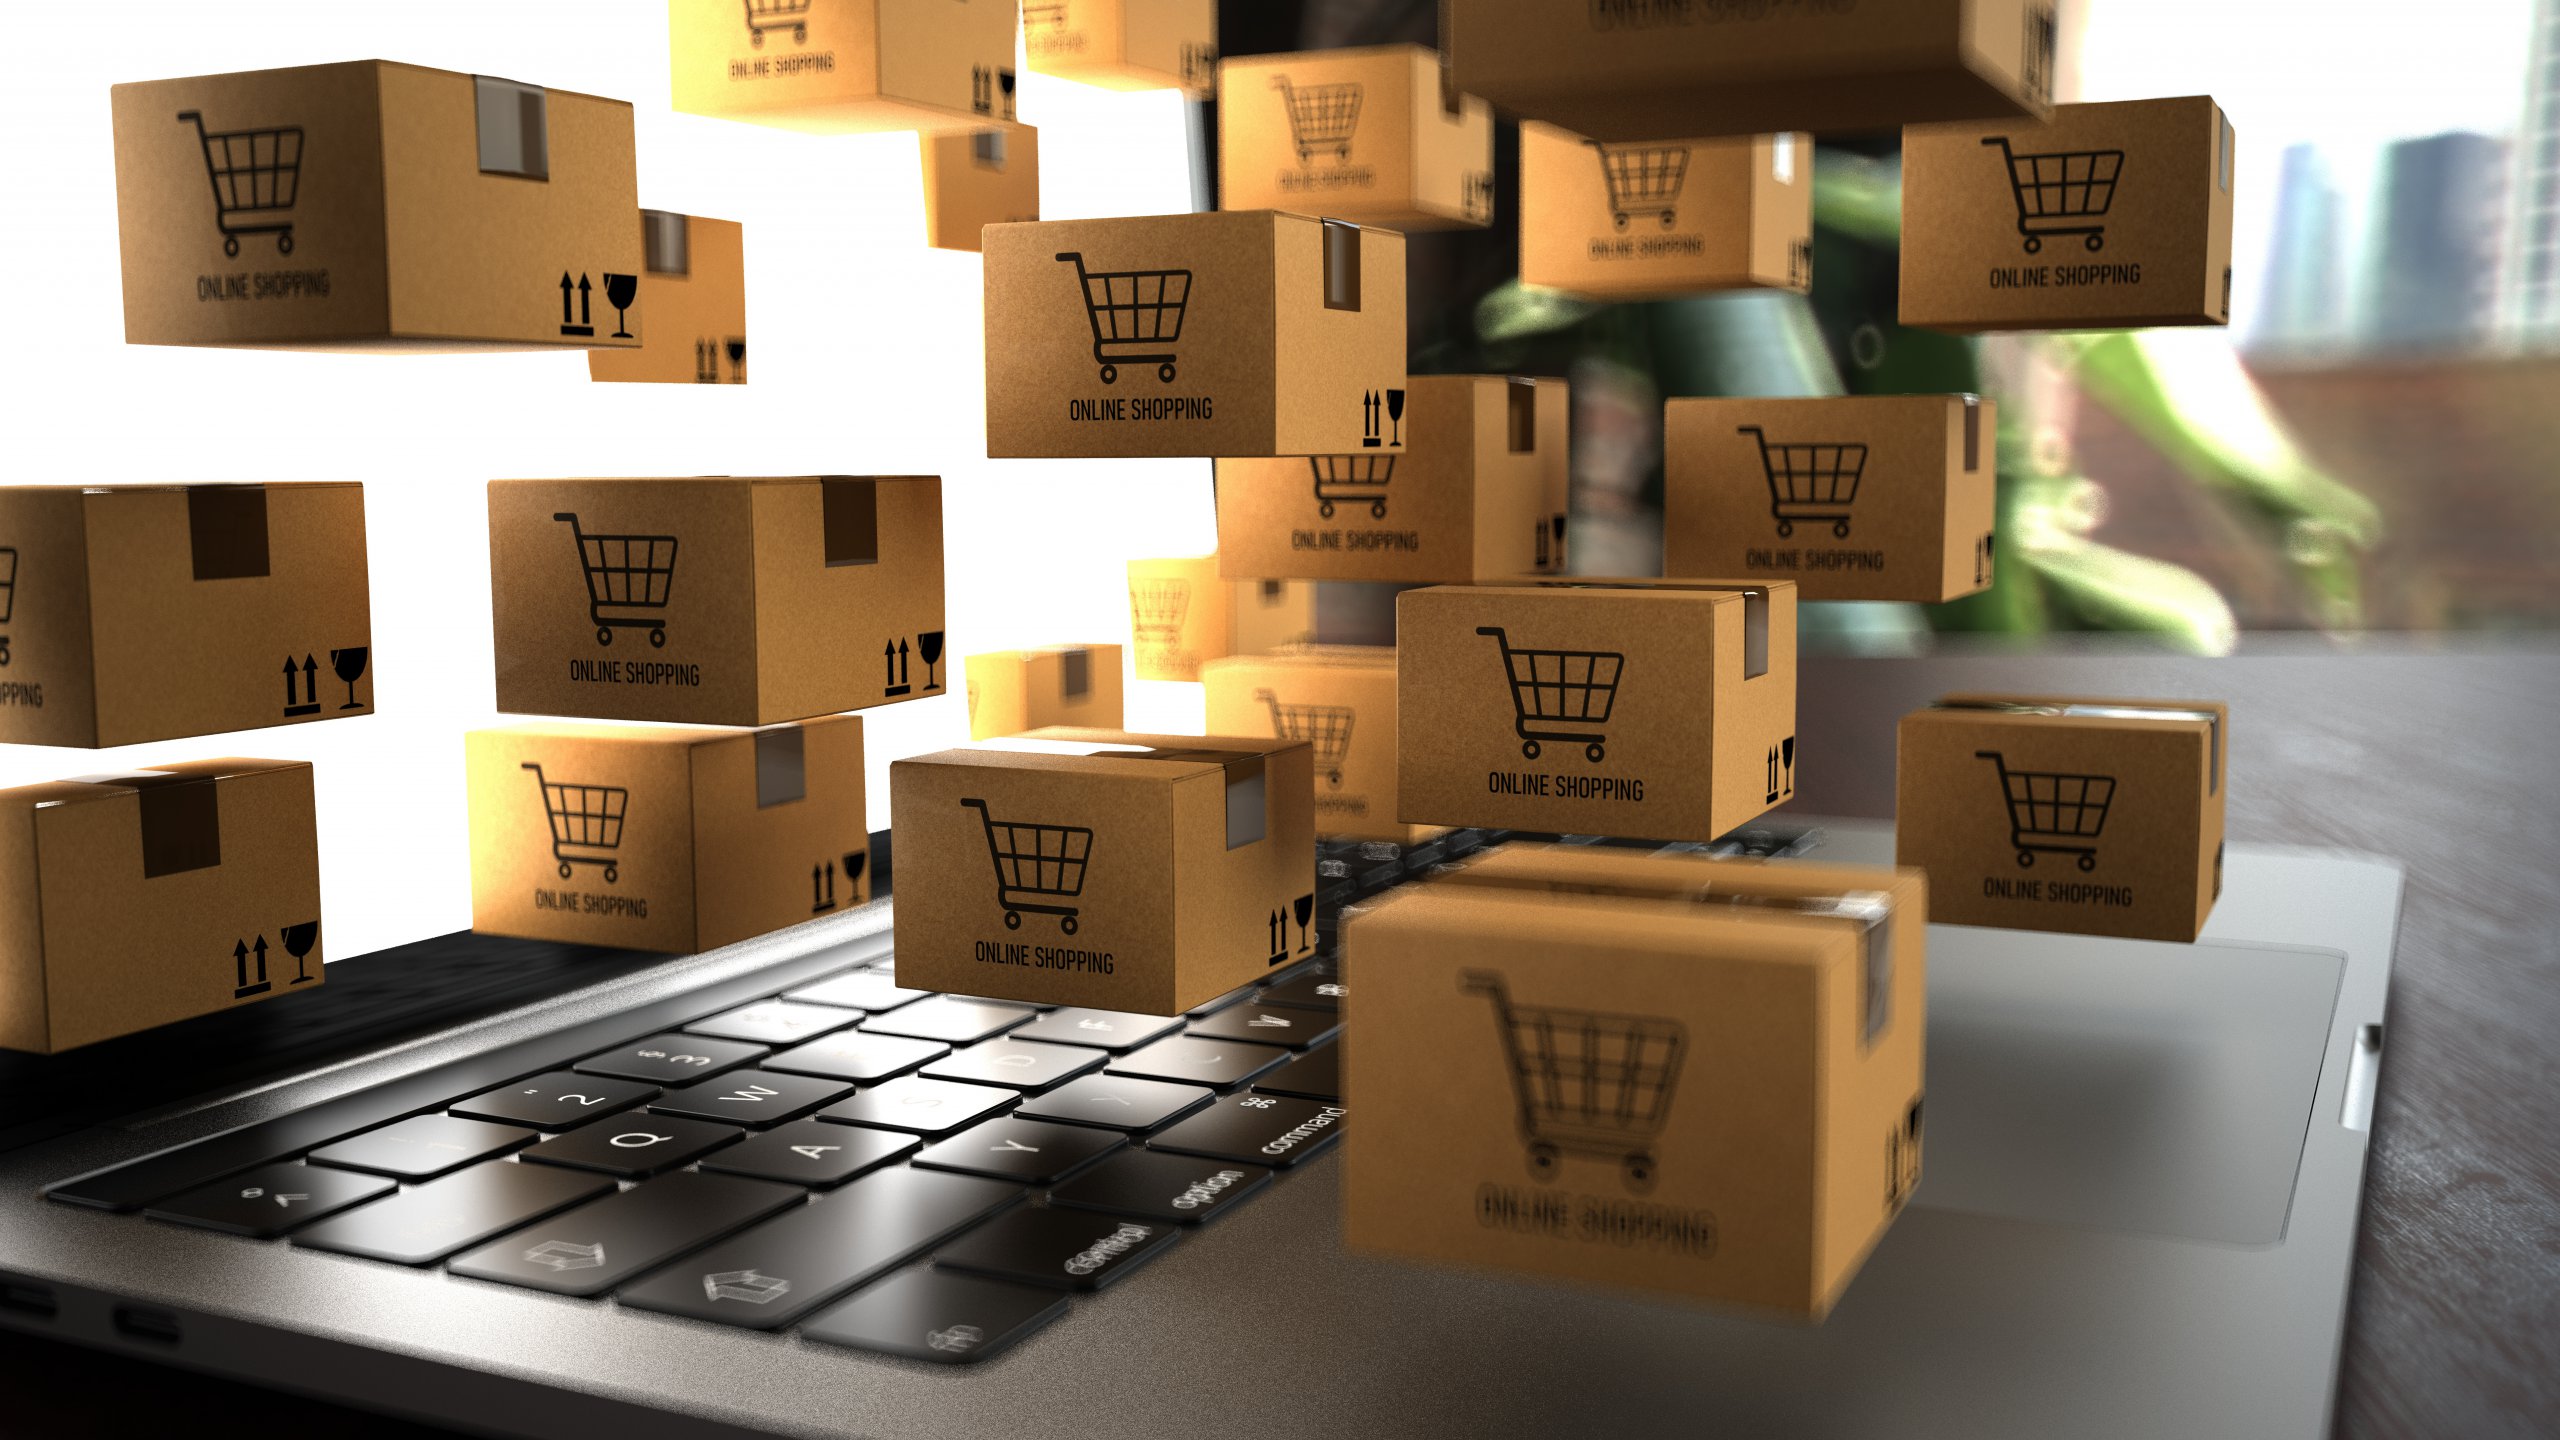 The Impact of E-Commerce on Business Models